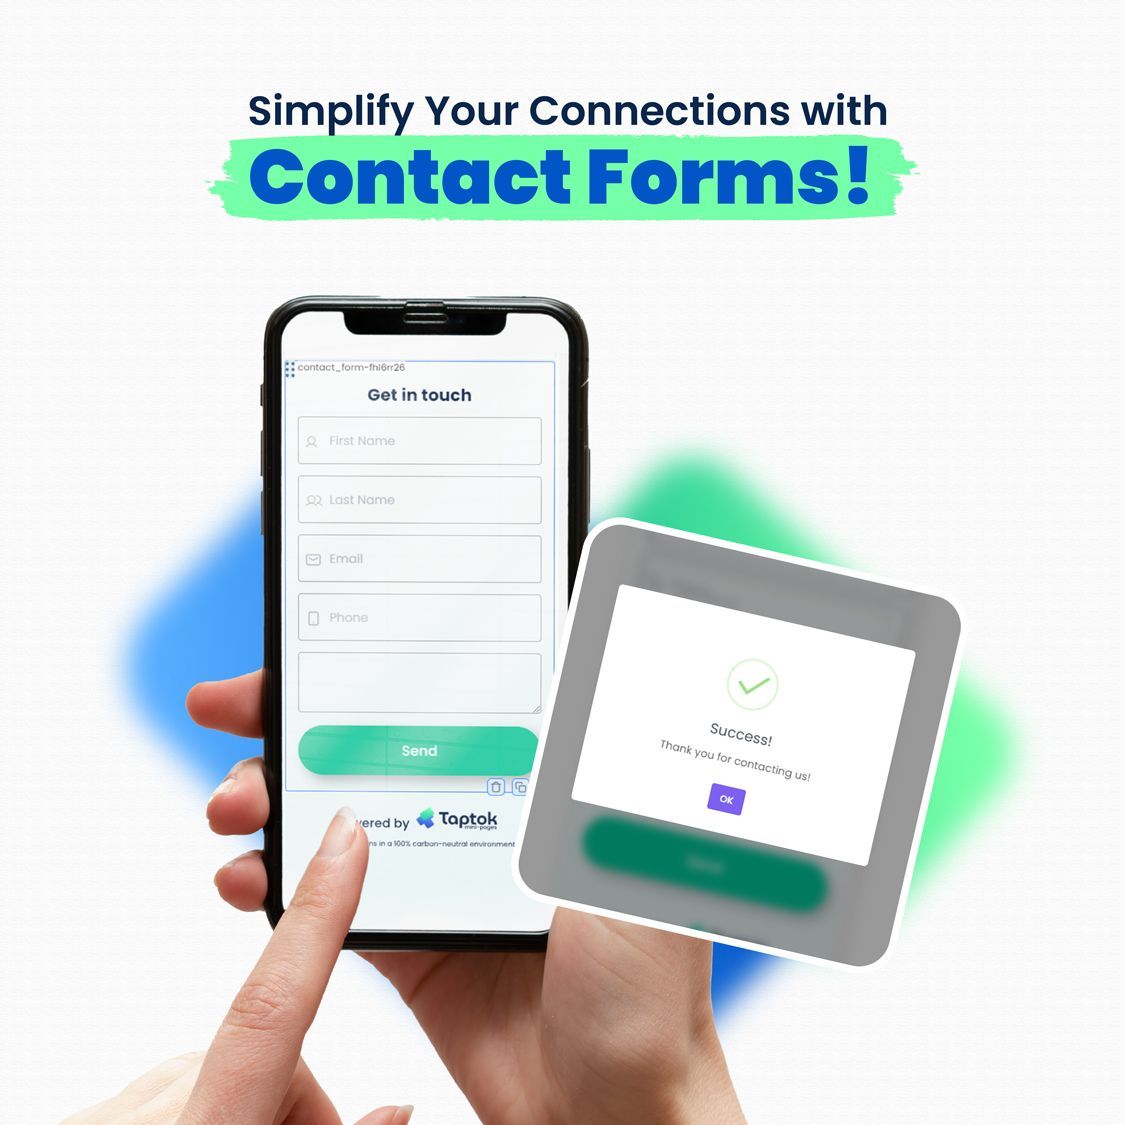 Our contact forms serve various purposes: ✅

✉️ Make it easy for prospects to reach out for support or info.
📱 Request a call back from us.

Effortless communication made simple. 💼📨📞 
.
.
.
#ContactForms #EffortlessCommunication #CustomerSupport